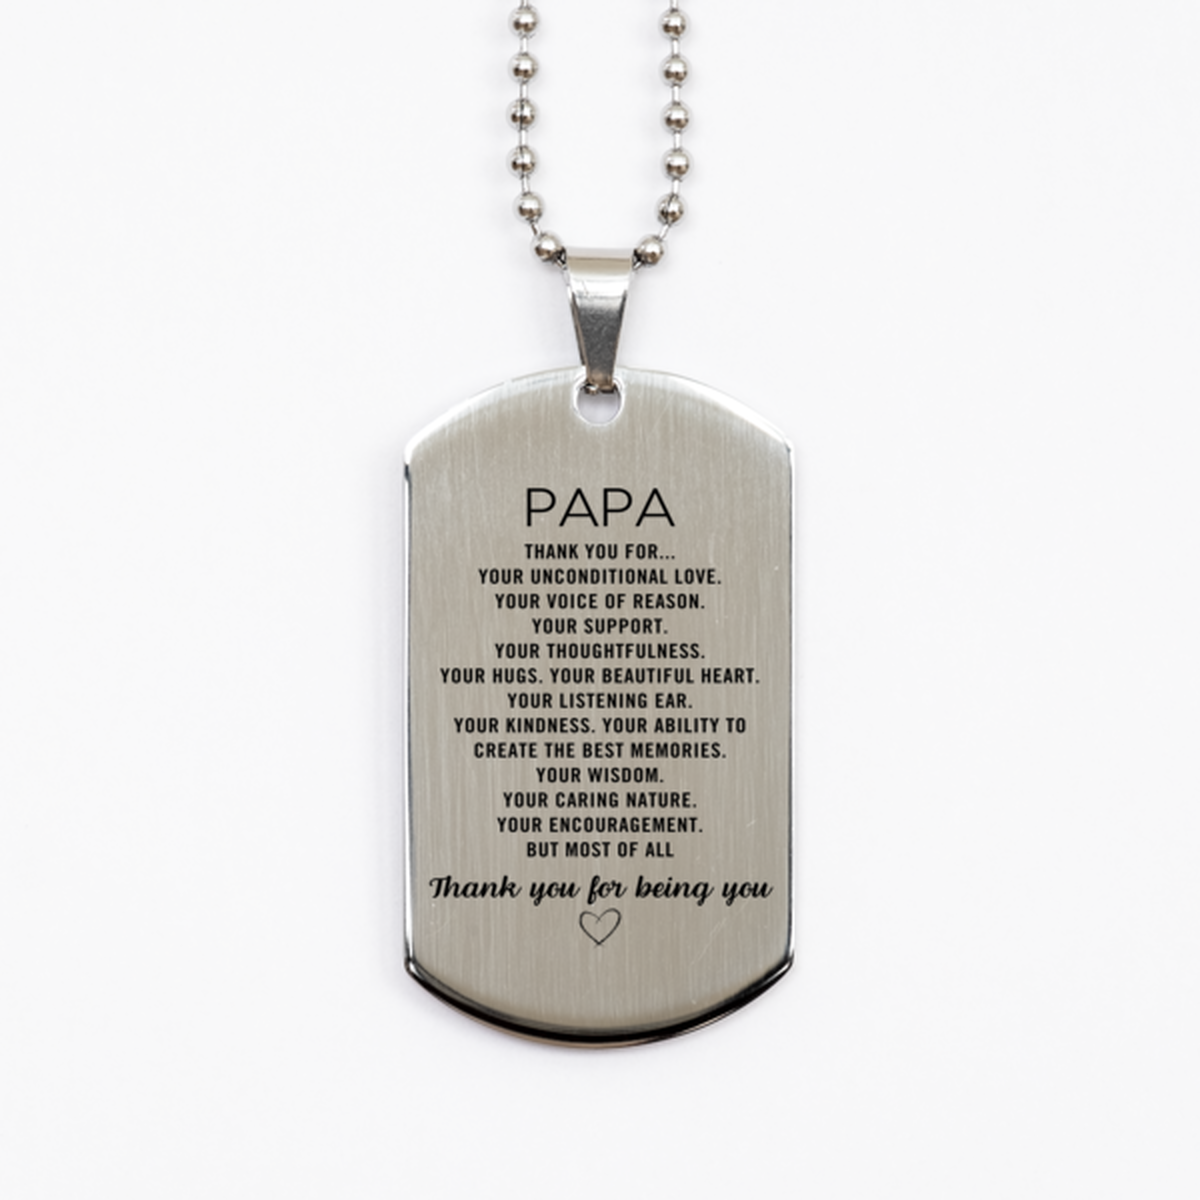 Papa Silver Dog Tag Custom, Engraved Gifts For Papa Christmas Graduation Birthday Gifts for Men Women Papa Thank you for Your unconditional love